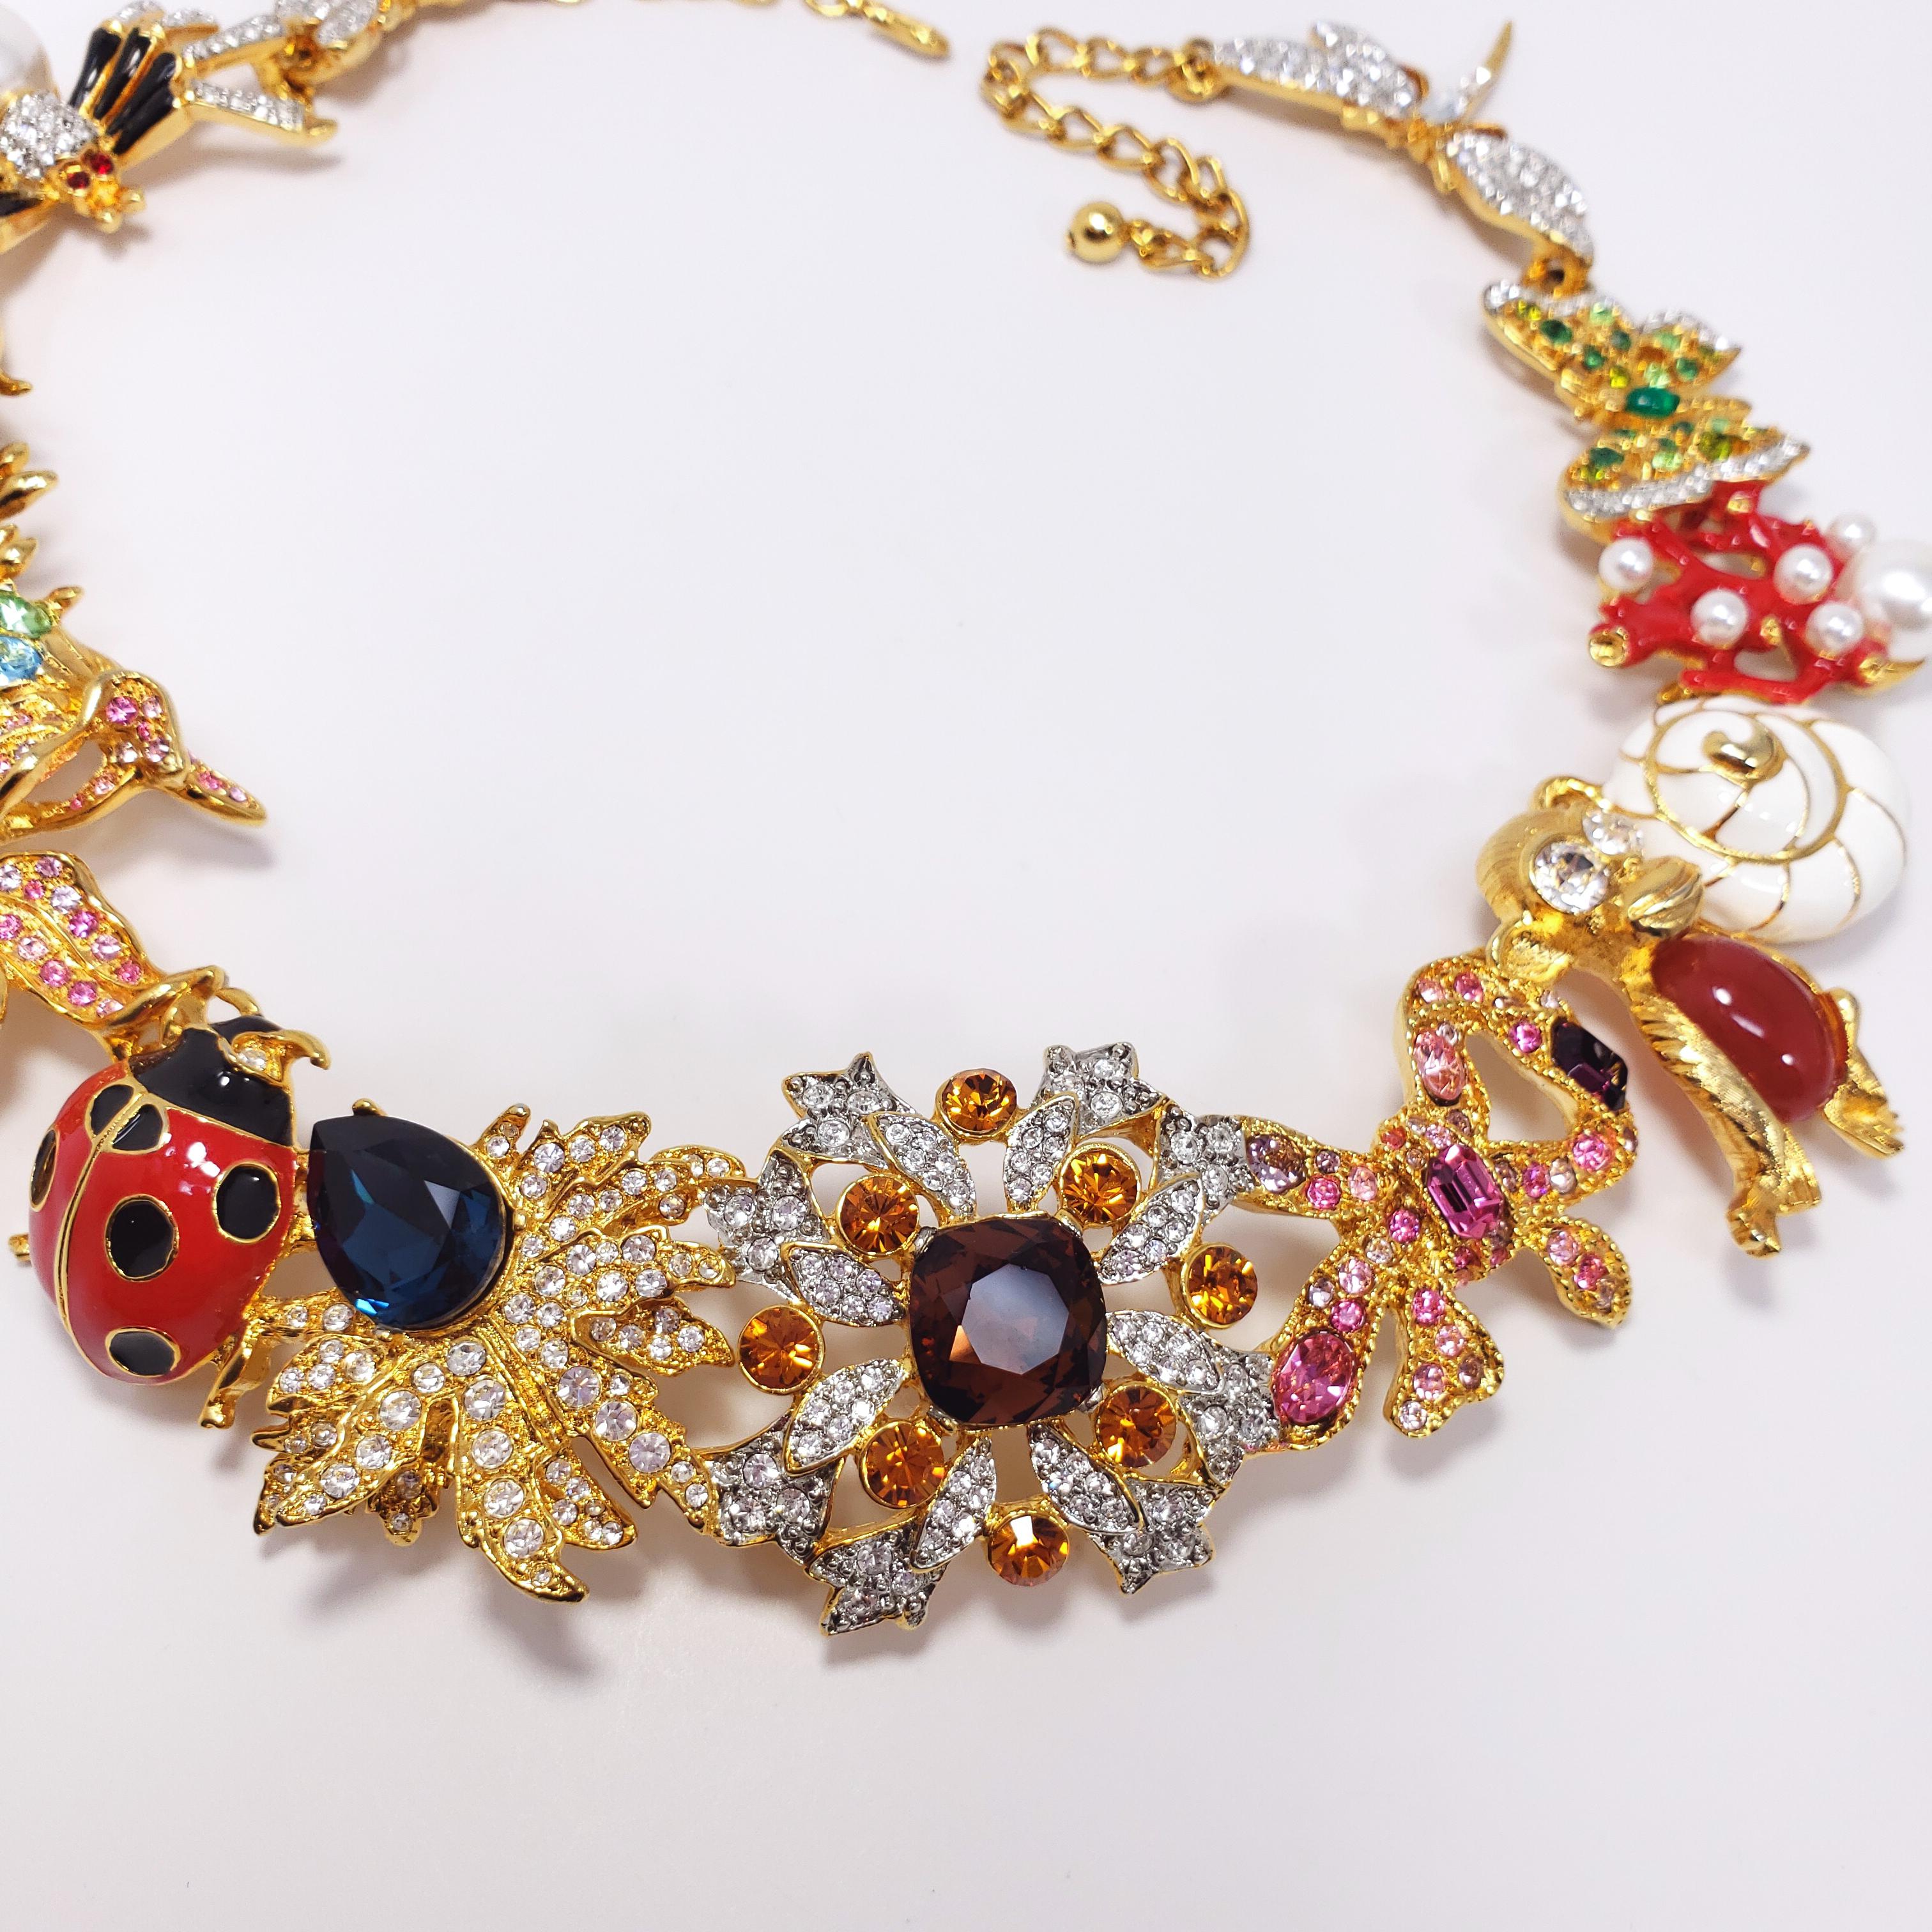 Women's Kenneth Jay Lane Ornate Colorful Crystal Kaleidoscope Collar Necklace in Gold